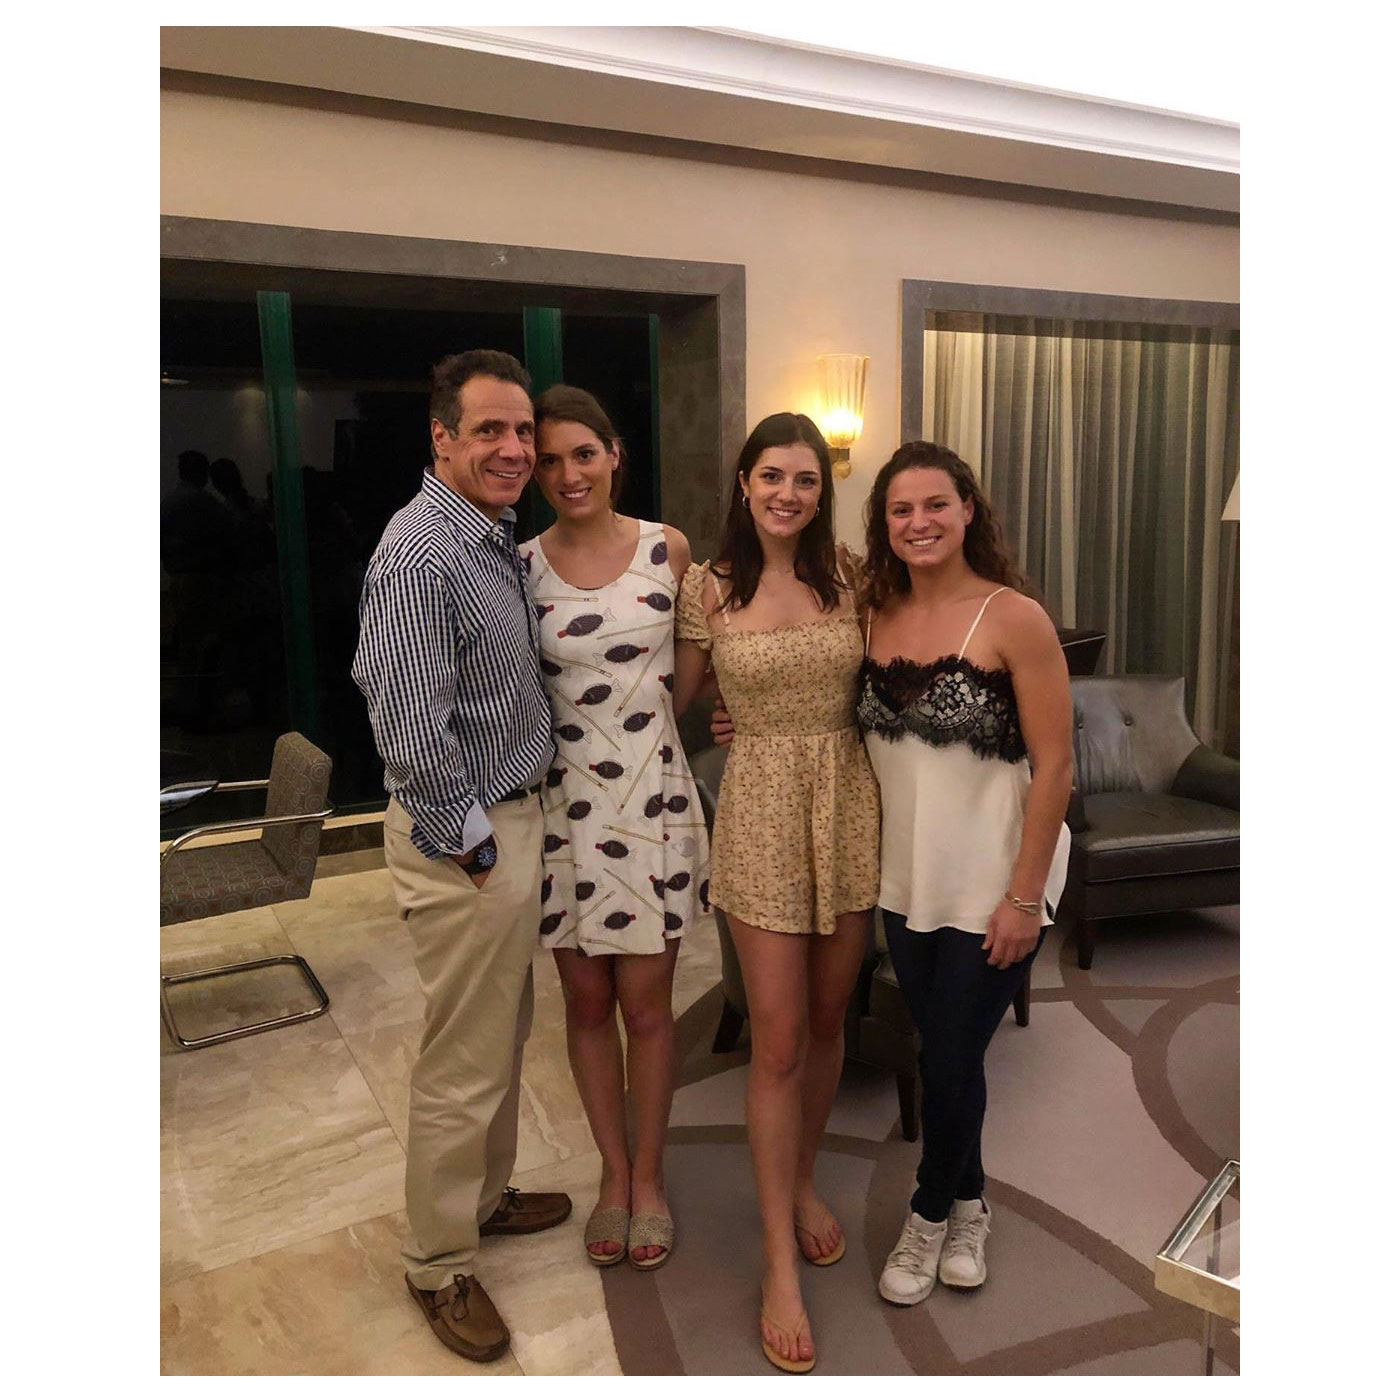 Andrew Cuomo Instagram And Daughters Cara and Mariah and daughter Michaela Guide to Andrew Cuomo and Chris Cuomo Families Amid the Coronavirus Pandemic